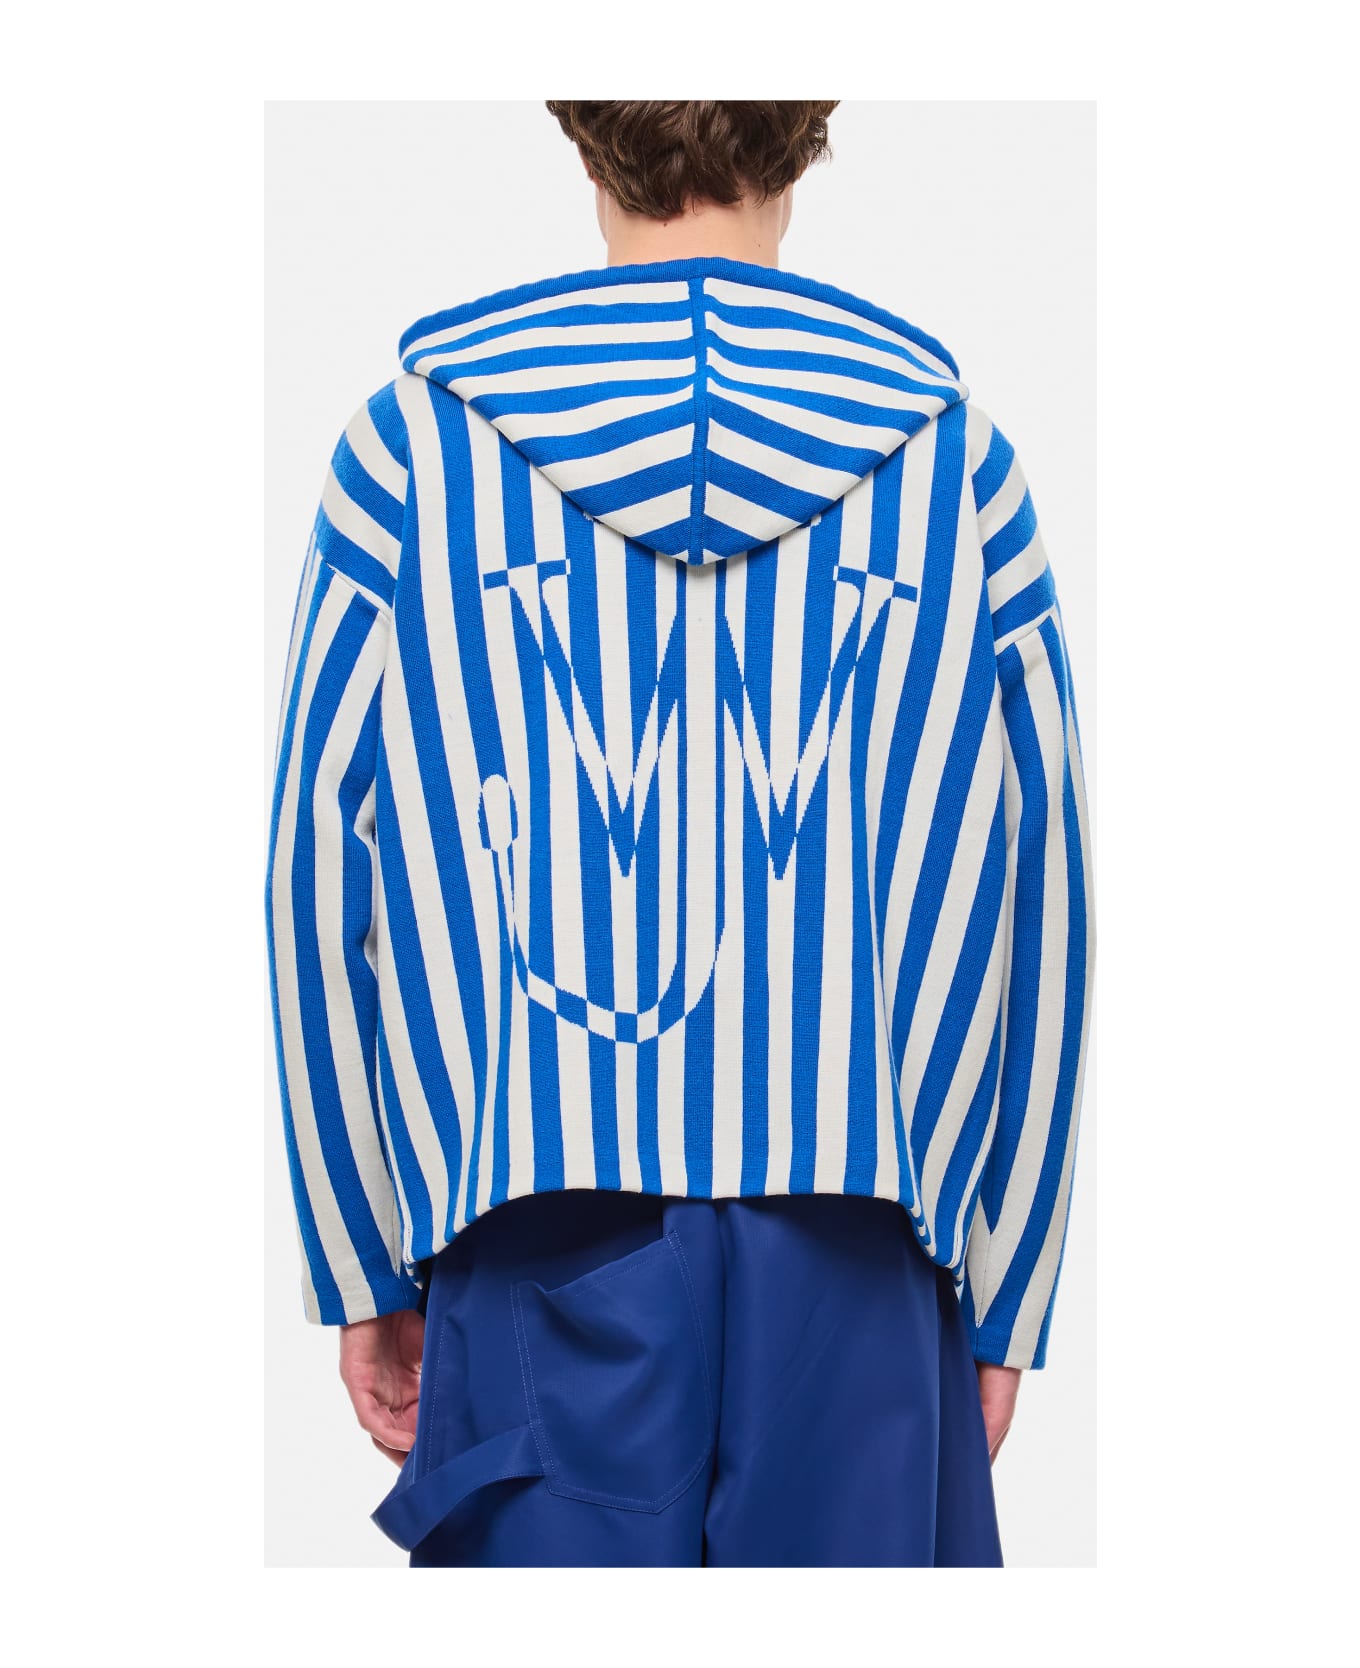 J.W. Anderson Striped Zipped Anchor Hoodie - BLUE/WHITE